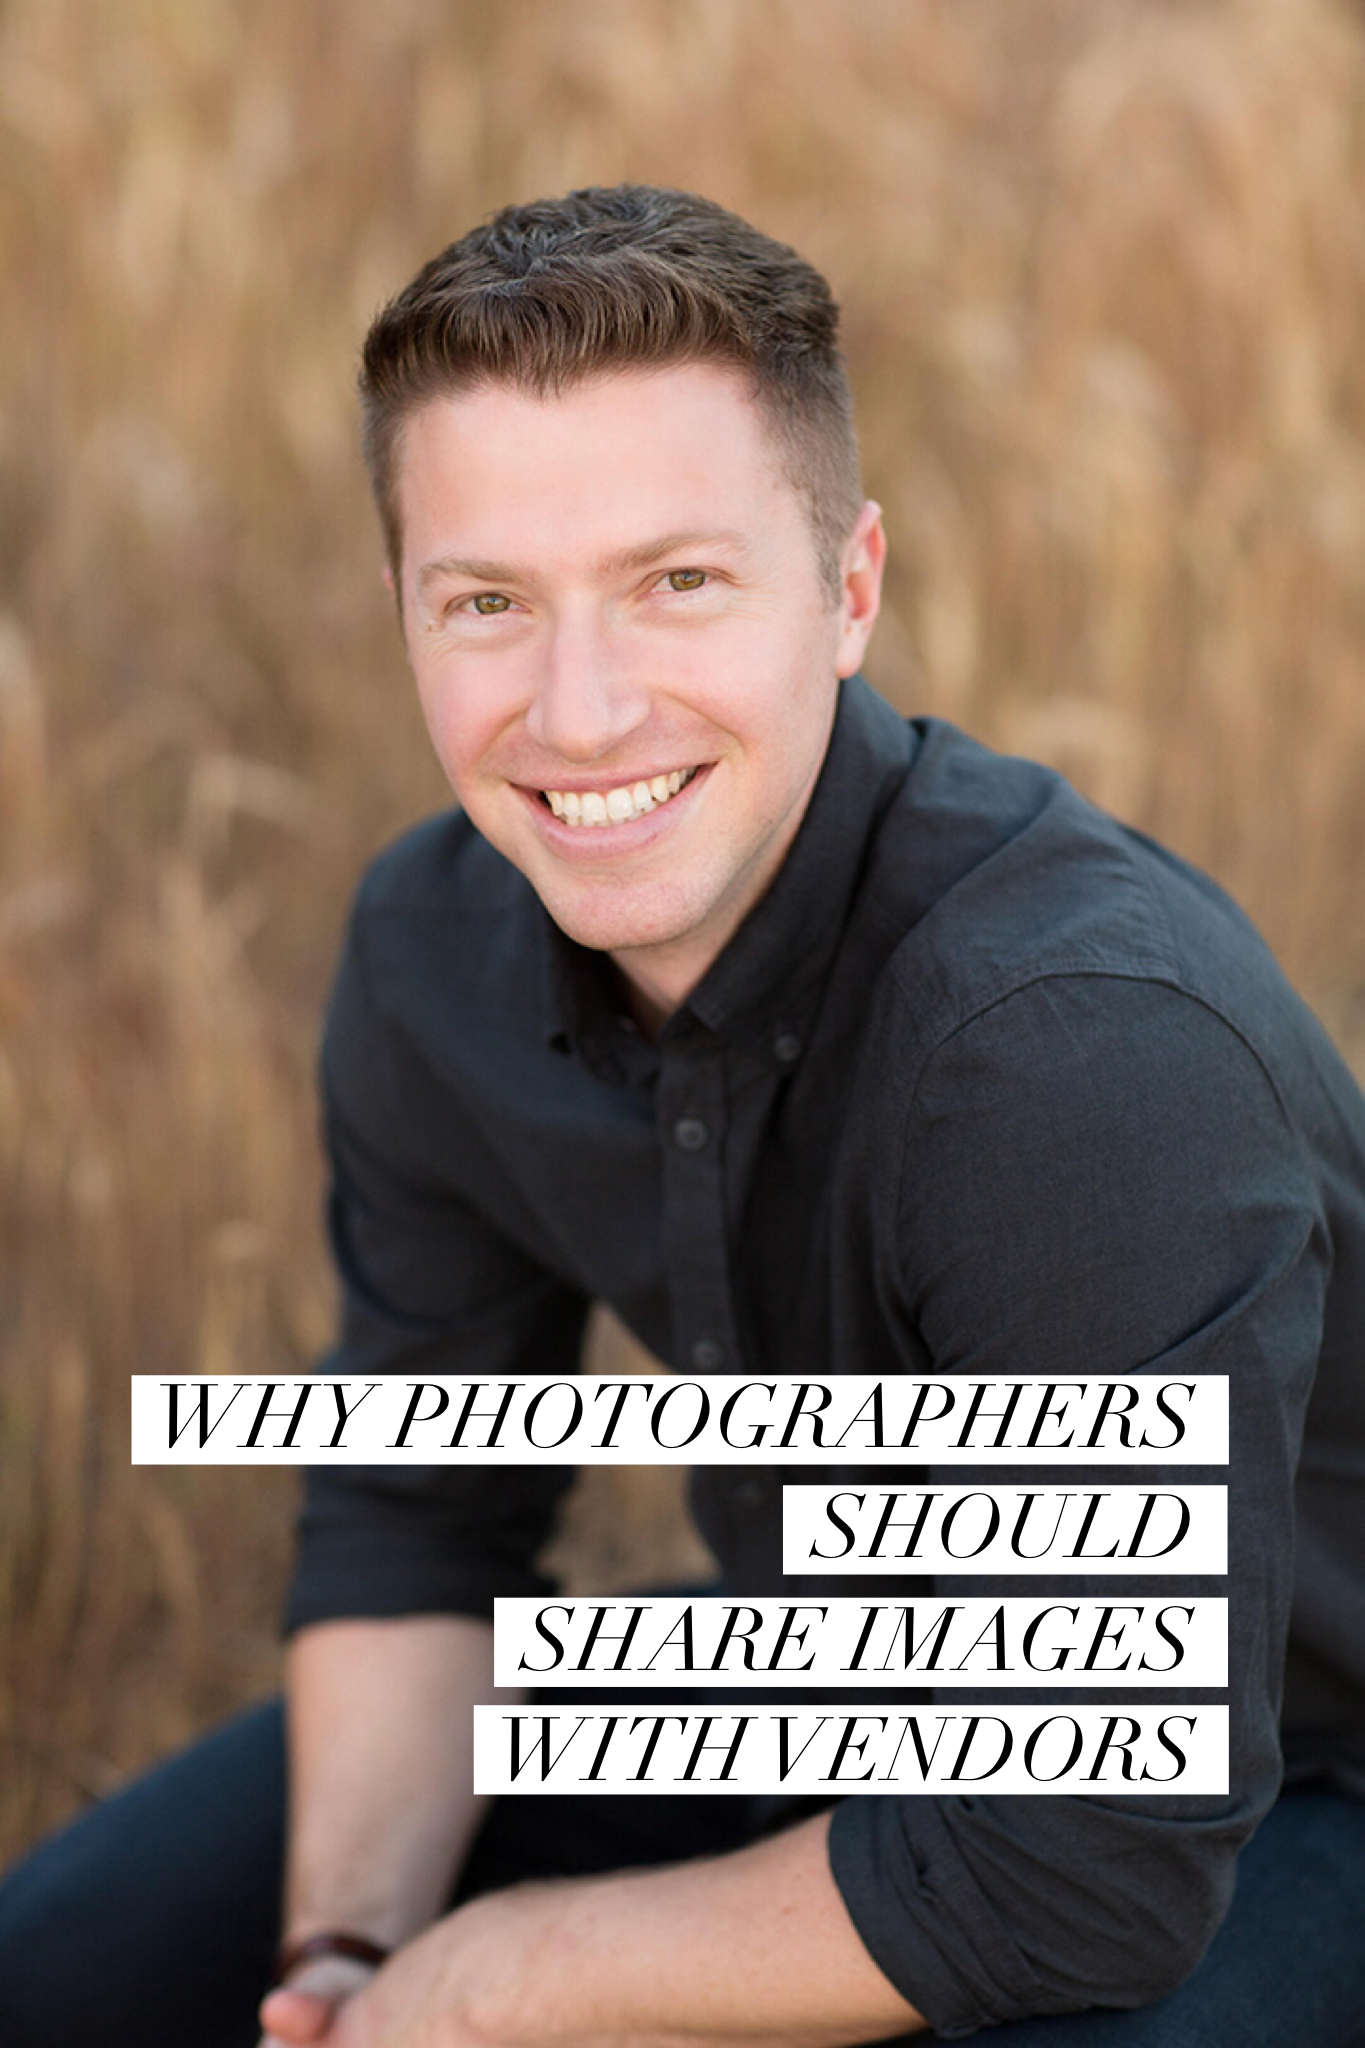 sharing images with vendors as a photographer